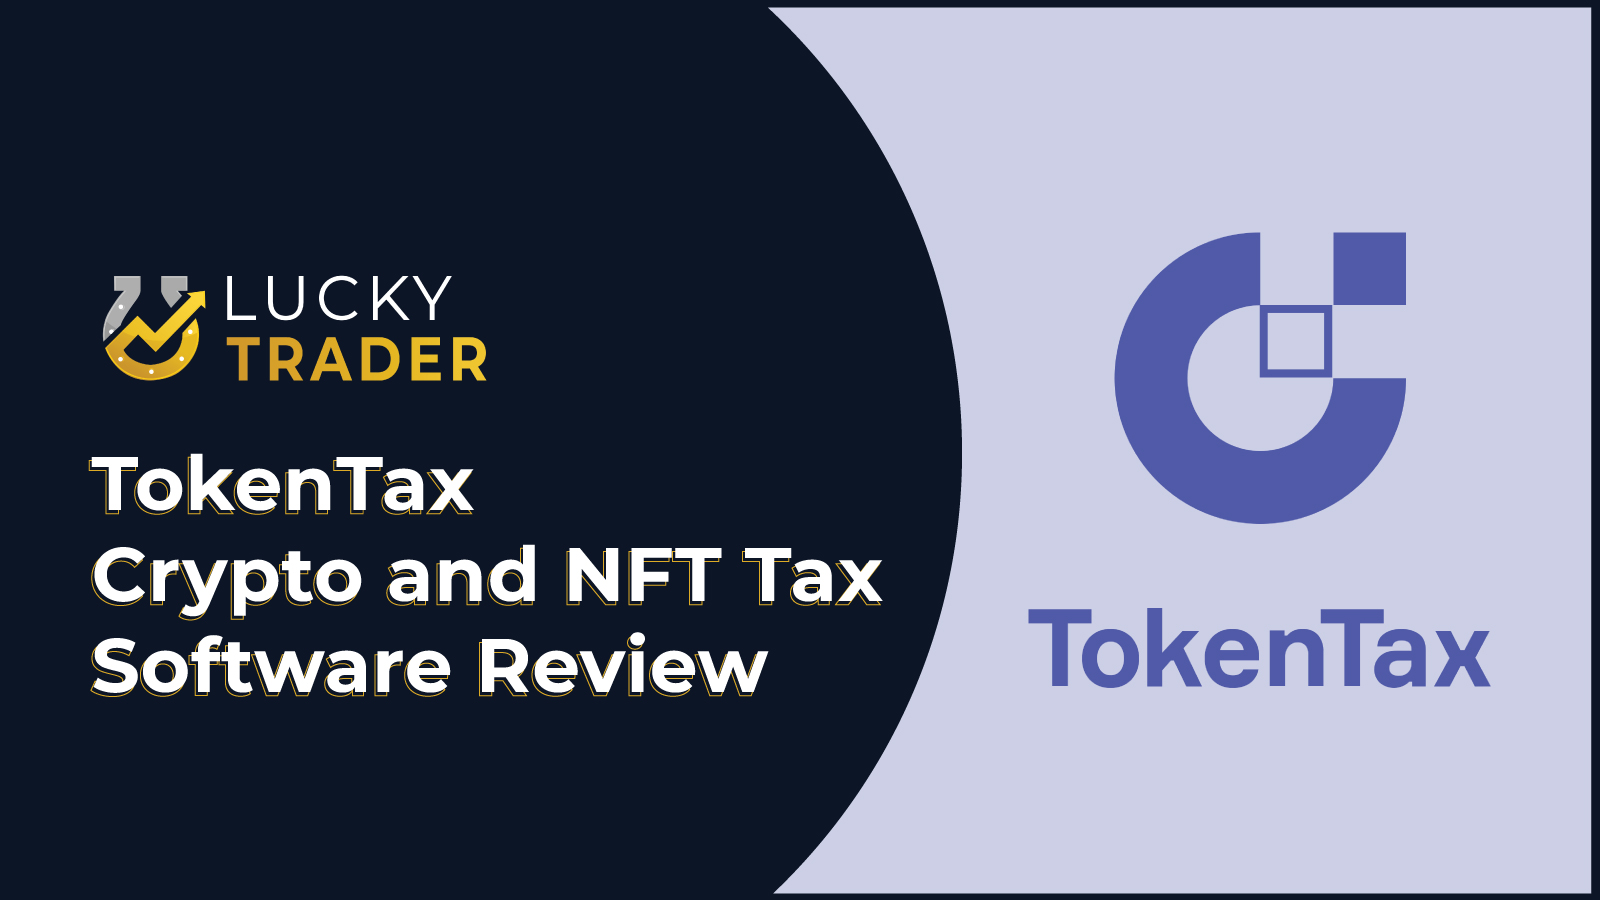 TokenTax Cryptocurrency and NFT Tax Software Review